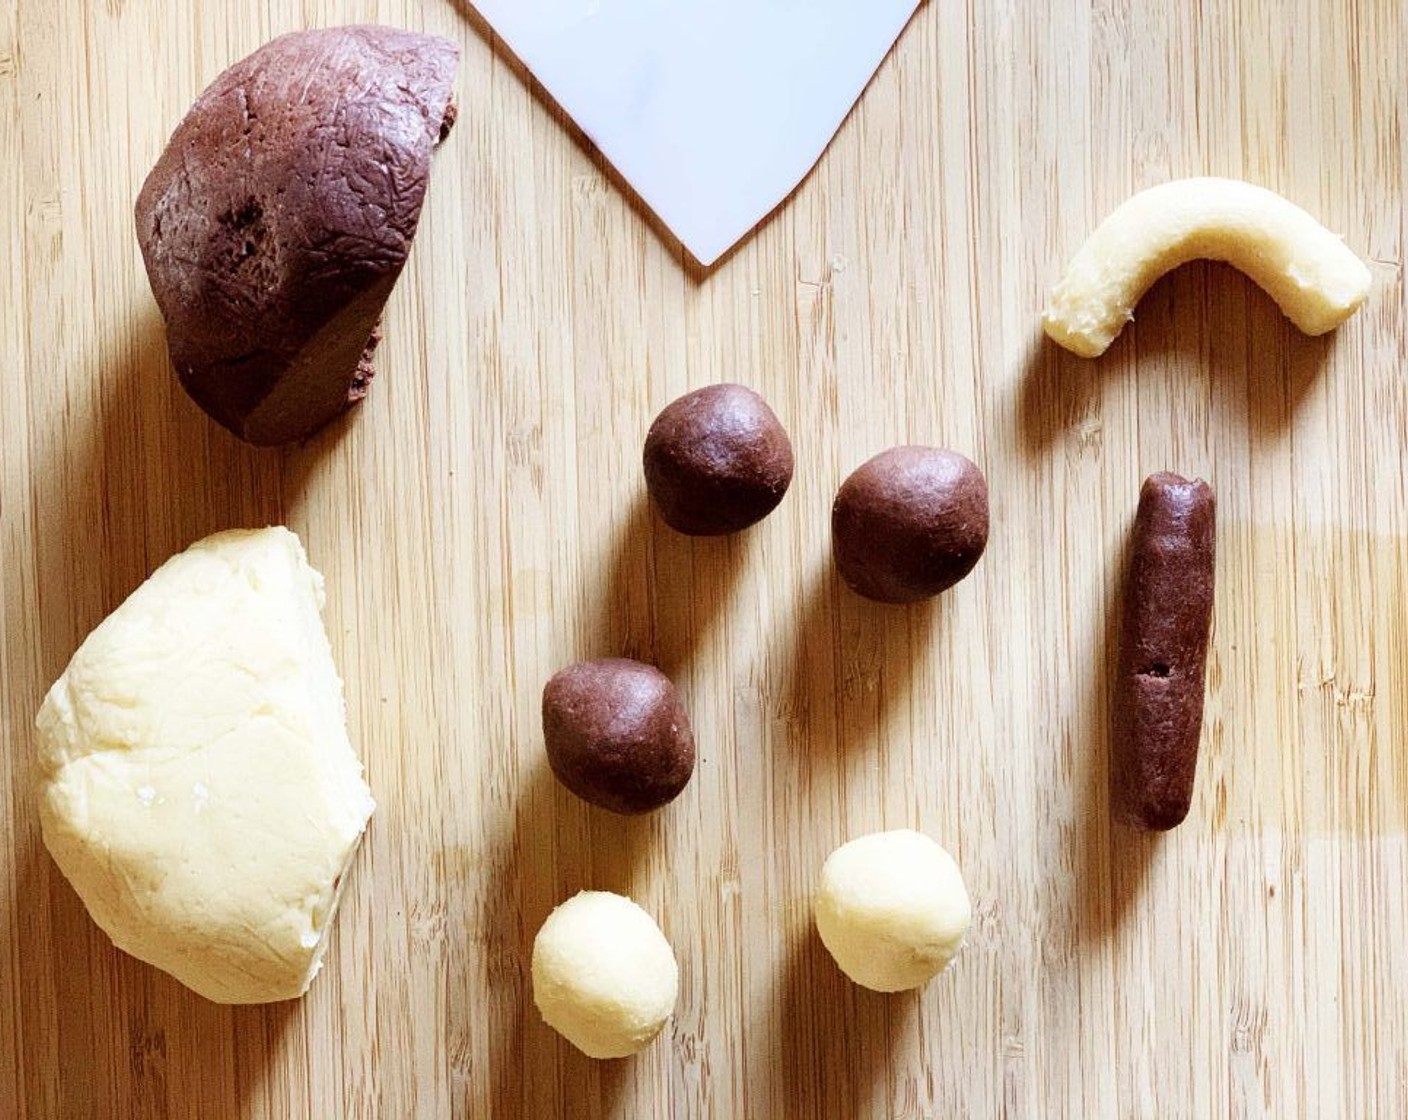 step 8 To shape your cookies, divide each mixture into a small ball, 12 grams each. Then roll each ball into a 1/2-inch (1cm) thick and 6 centimeters long roll. Curve each into a half-moon and bring the chocolate and cream sides together to make a circle.